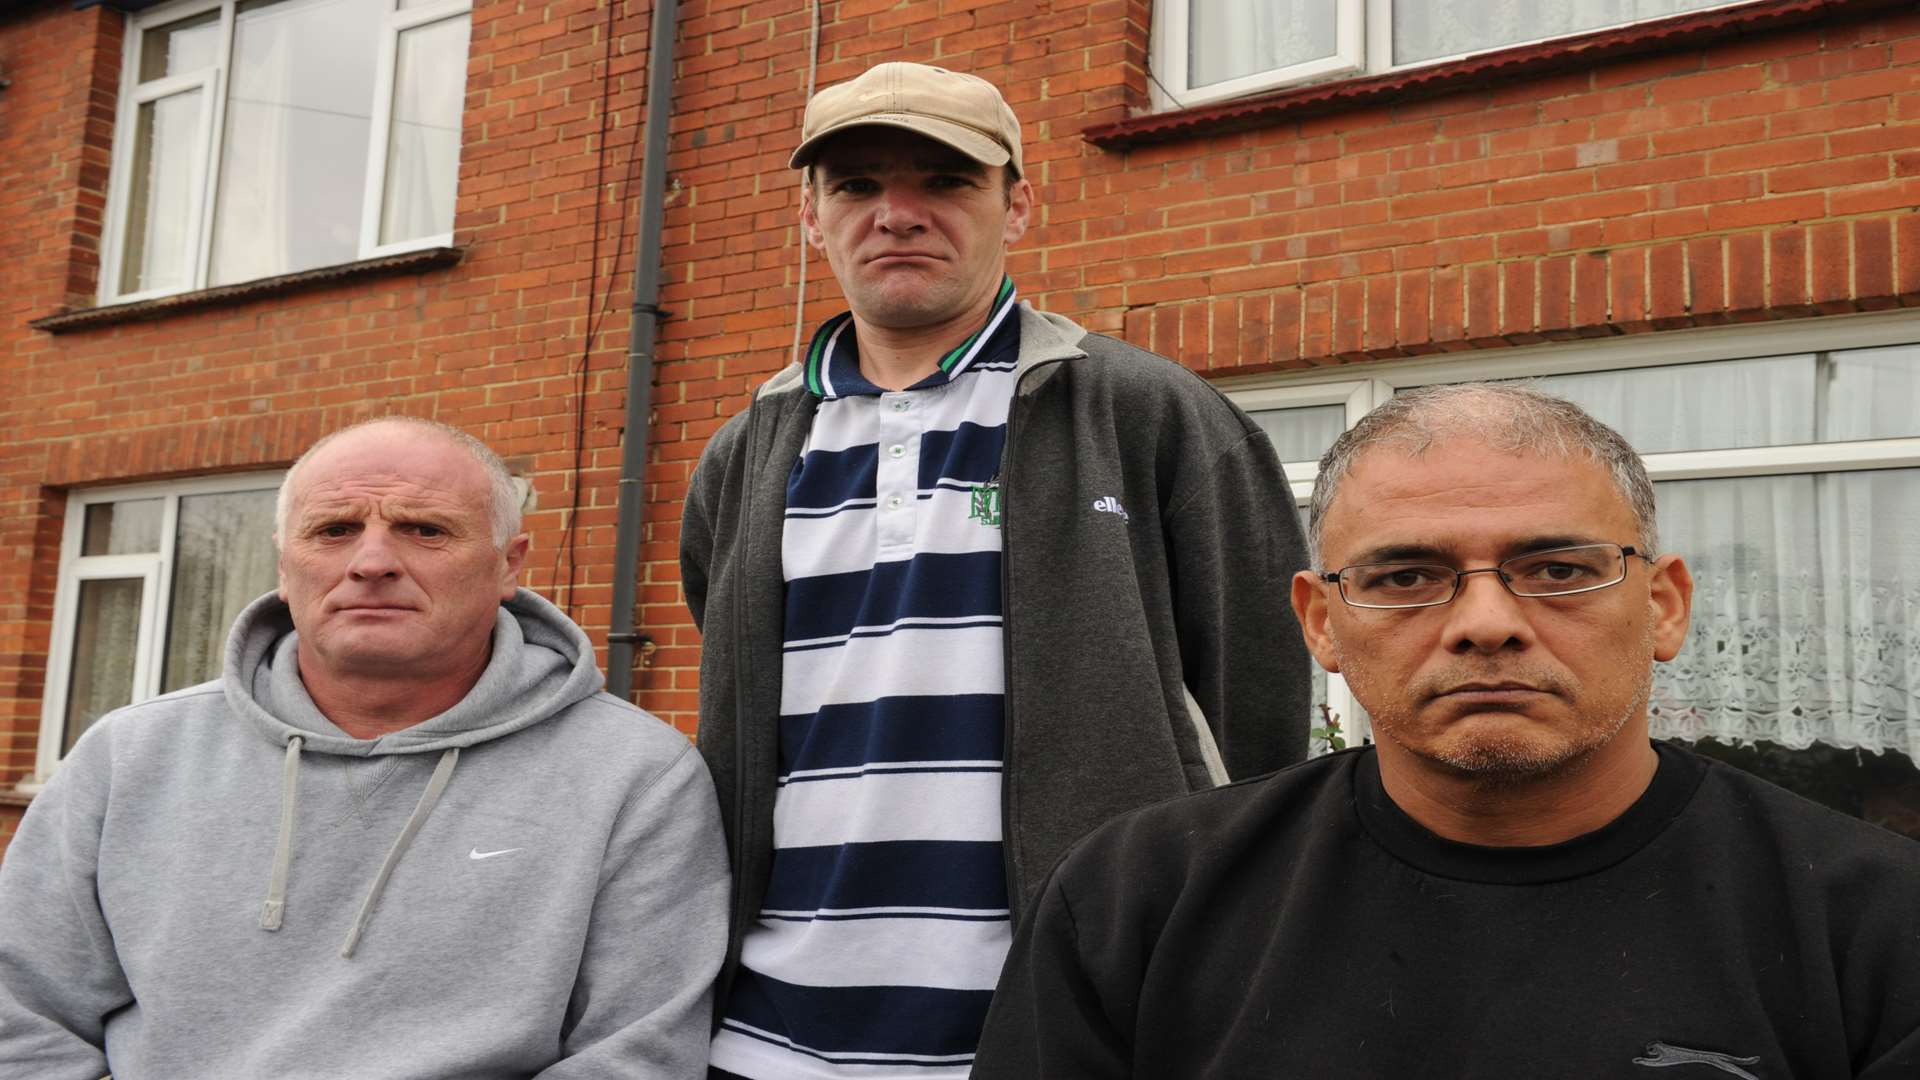 Alex Steven, Robert Jefford and Dave Clark, pictured when they were sacked by Veolia